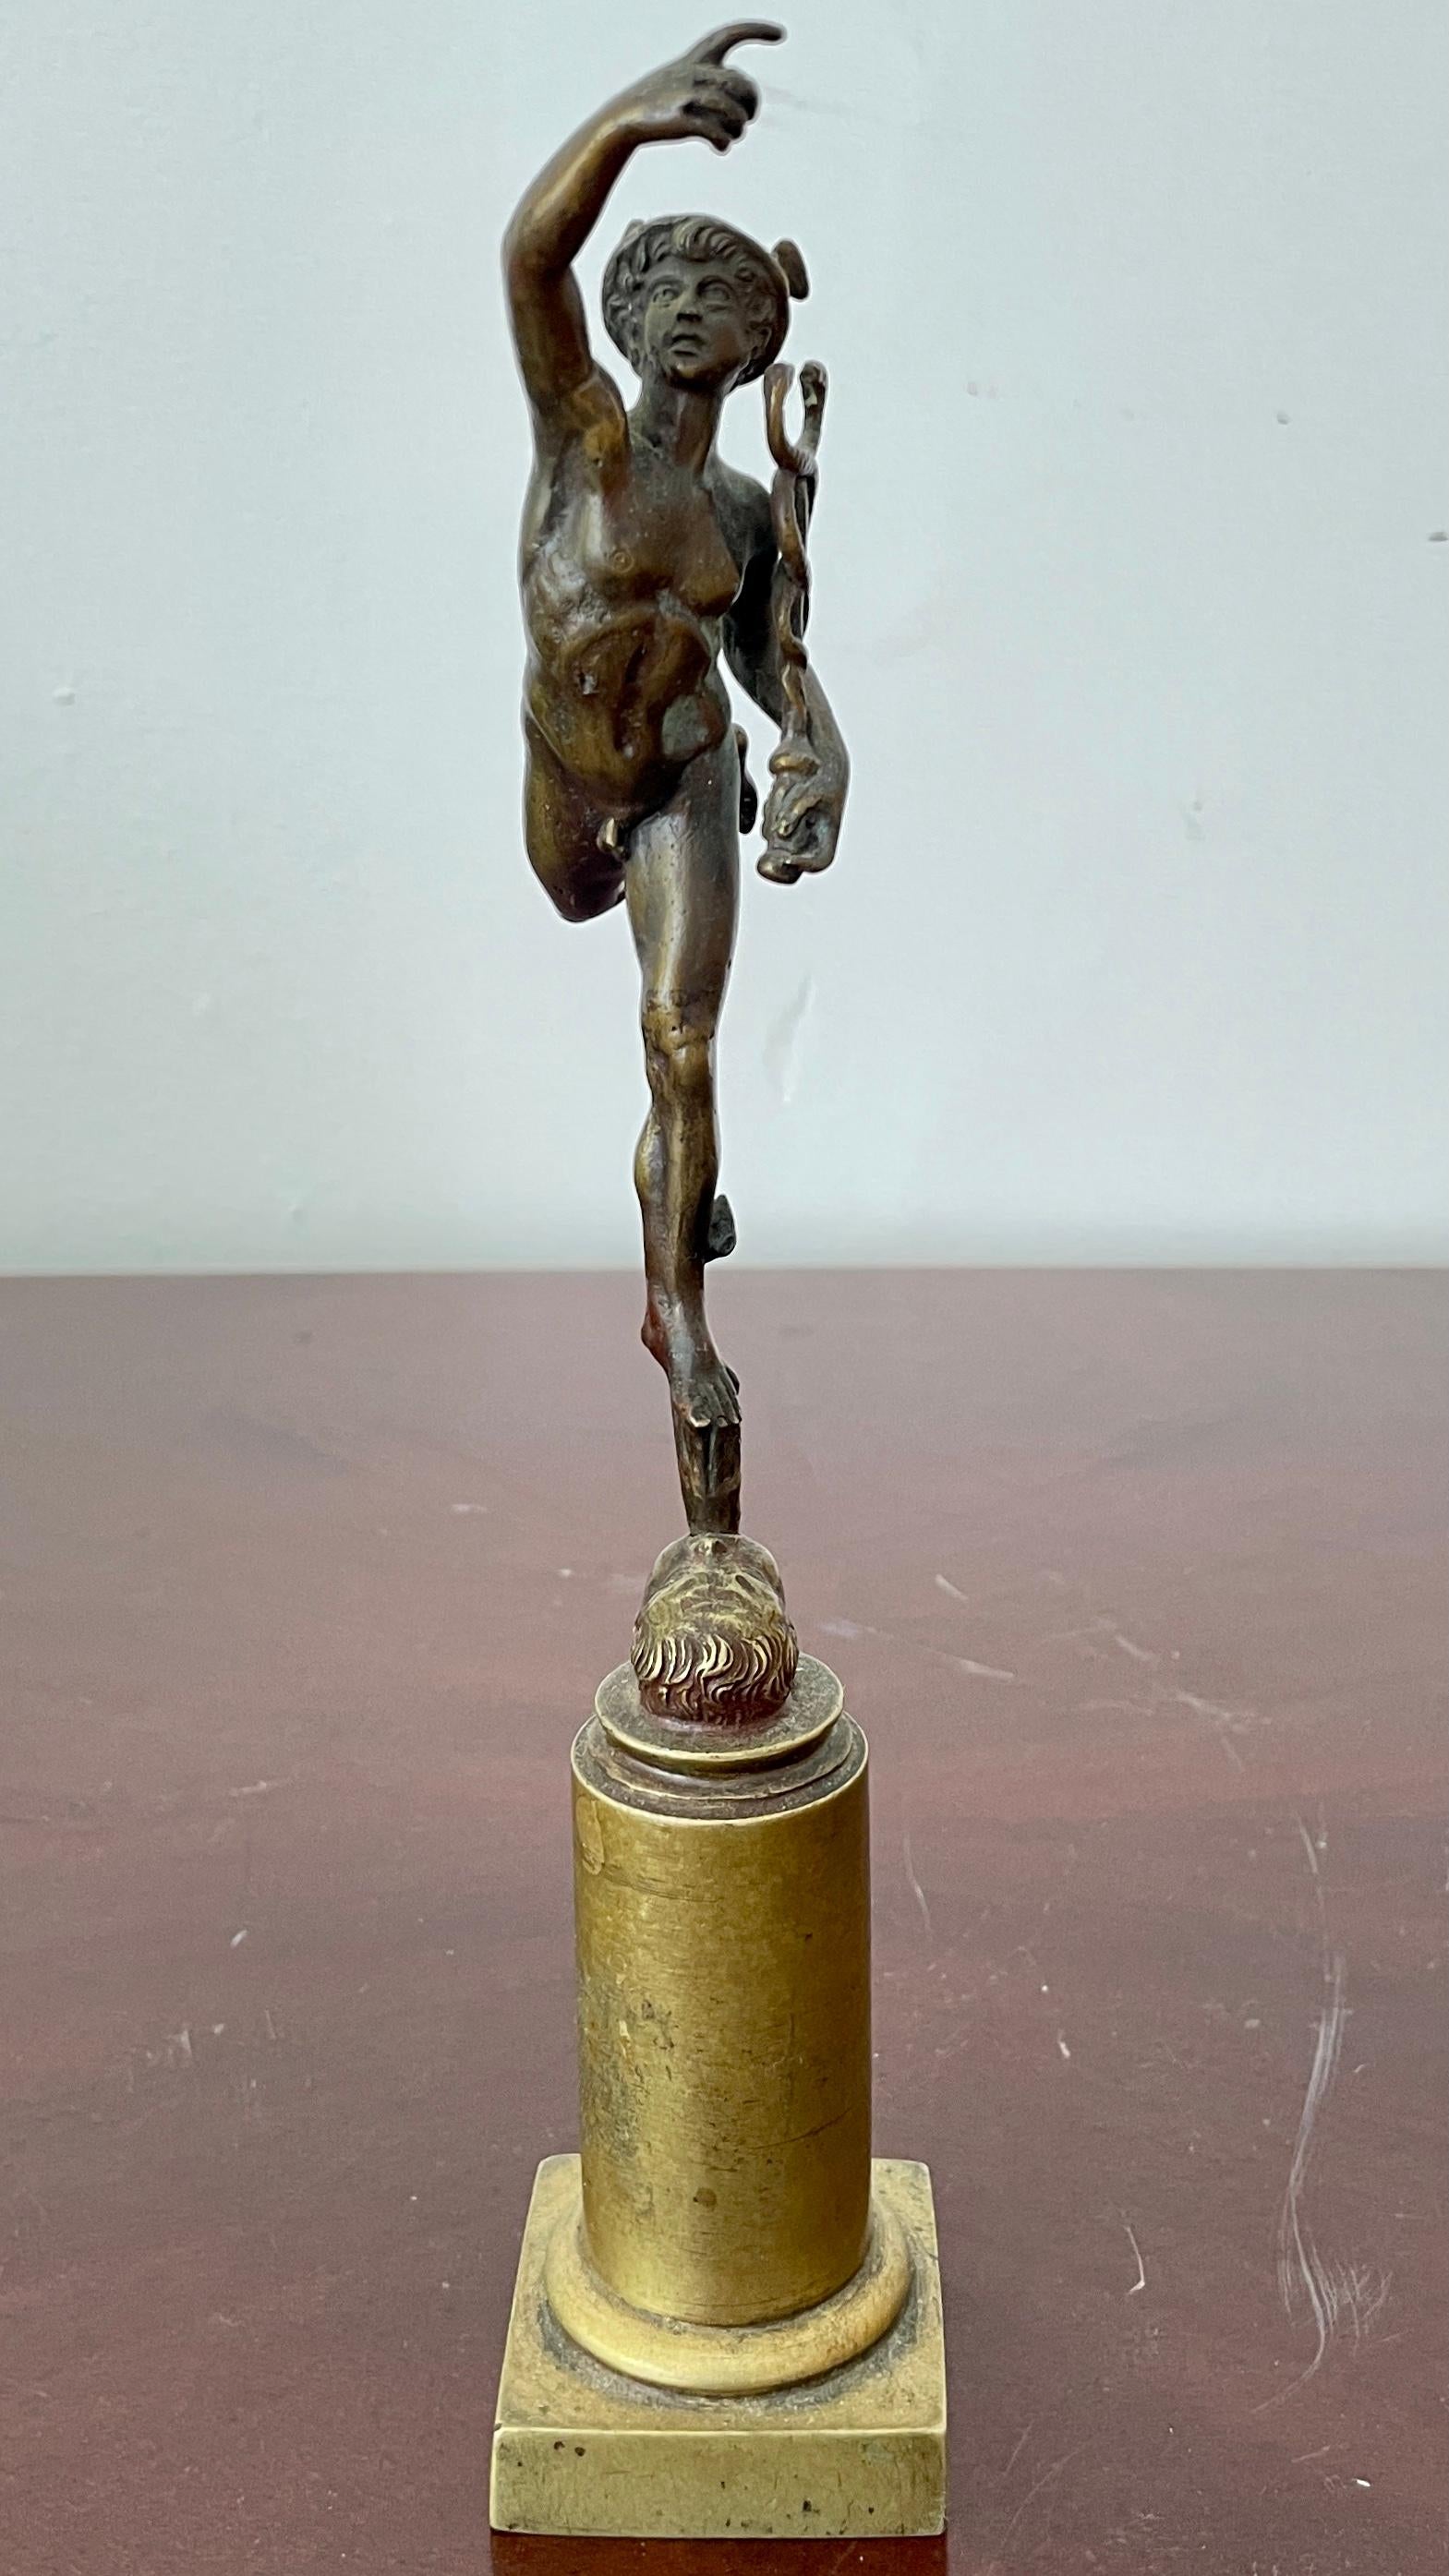 Beautiful miniature Bronze statue of Greek god Hermes carrying his staff on a pedestal base. Great addition to your classic inspired interiors and table tops.